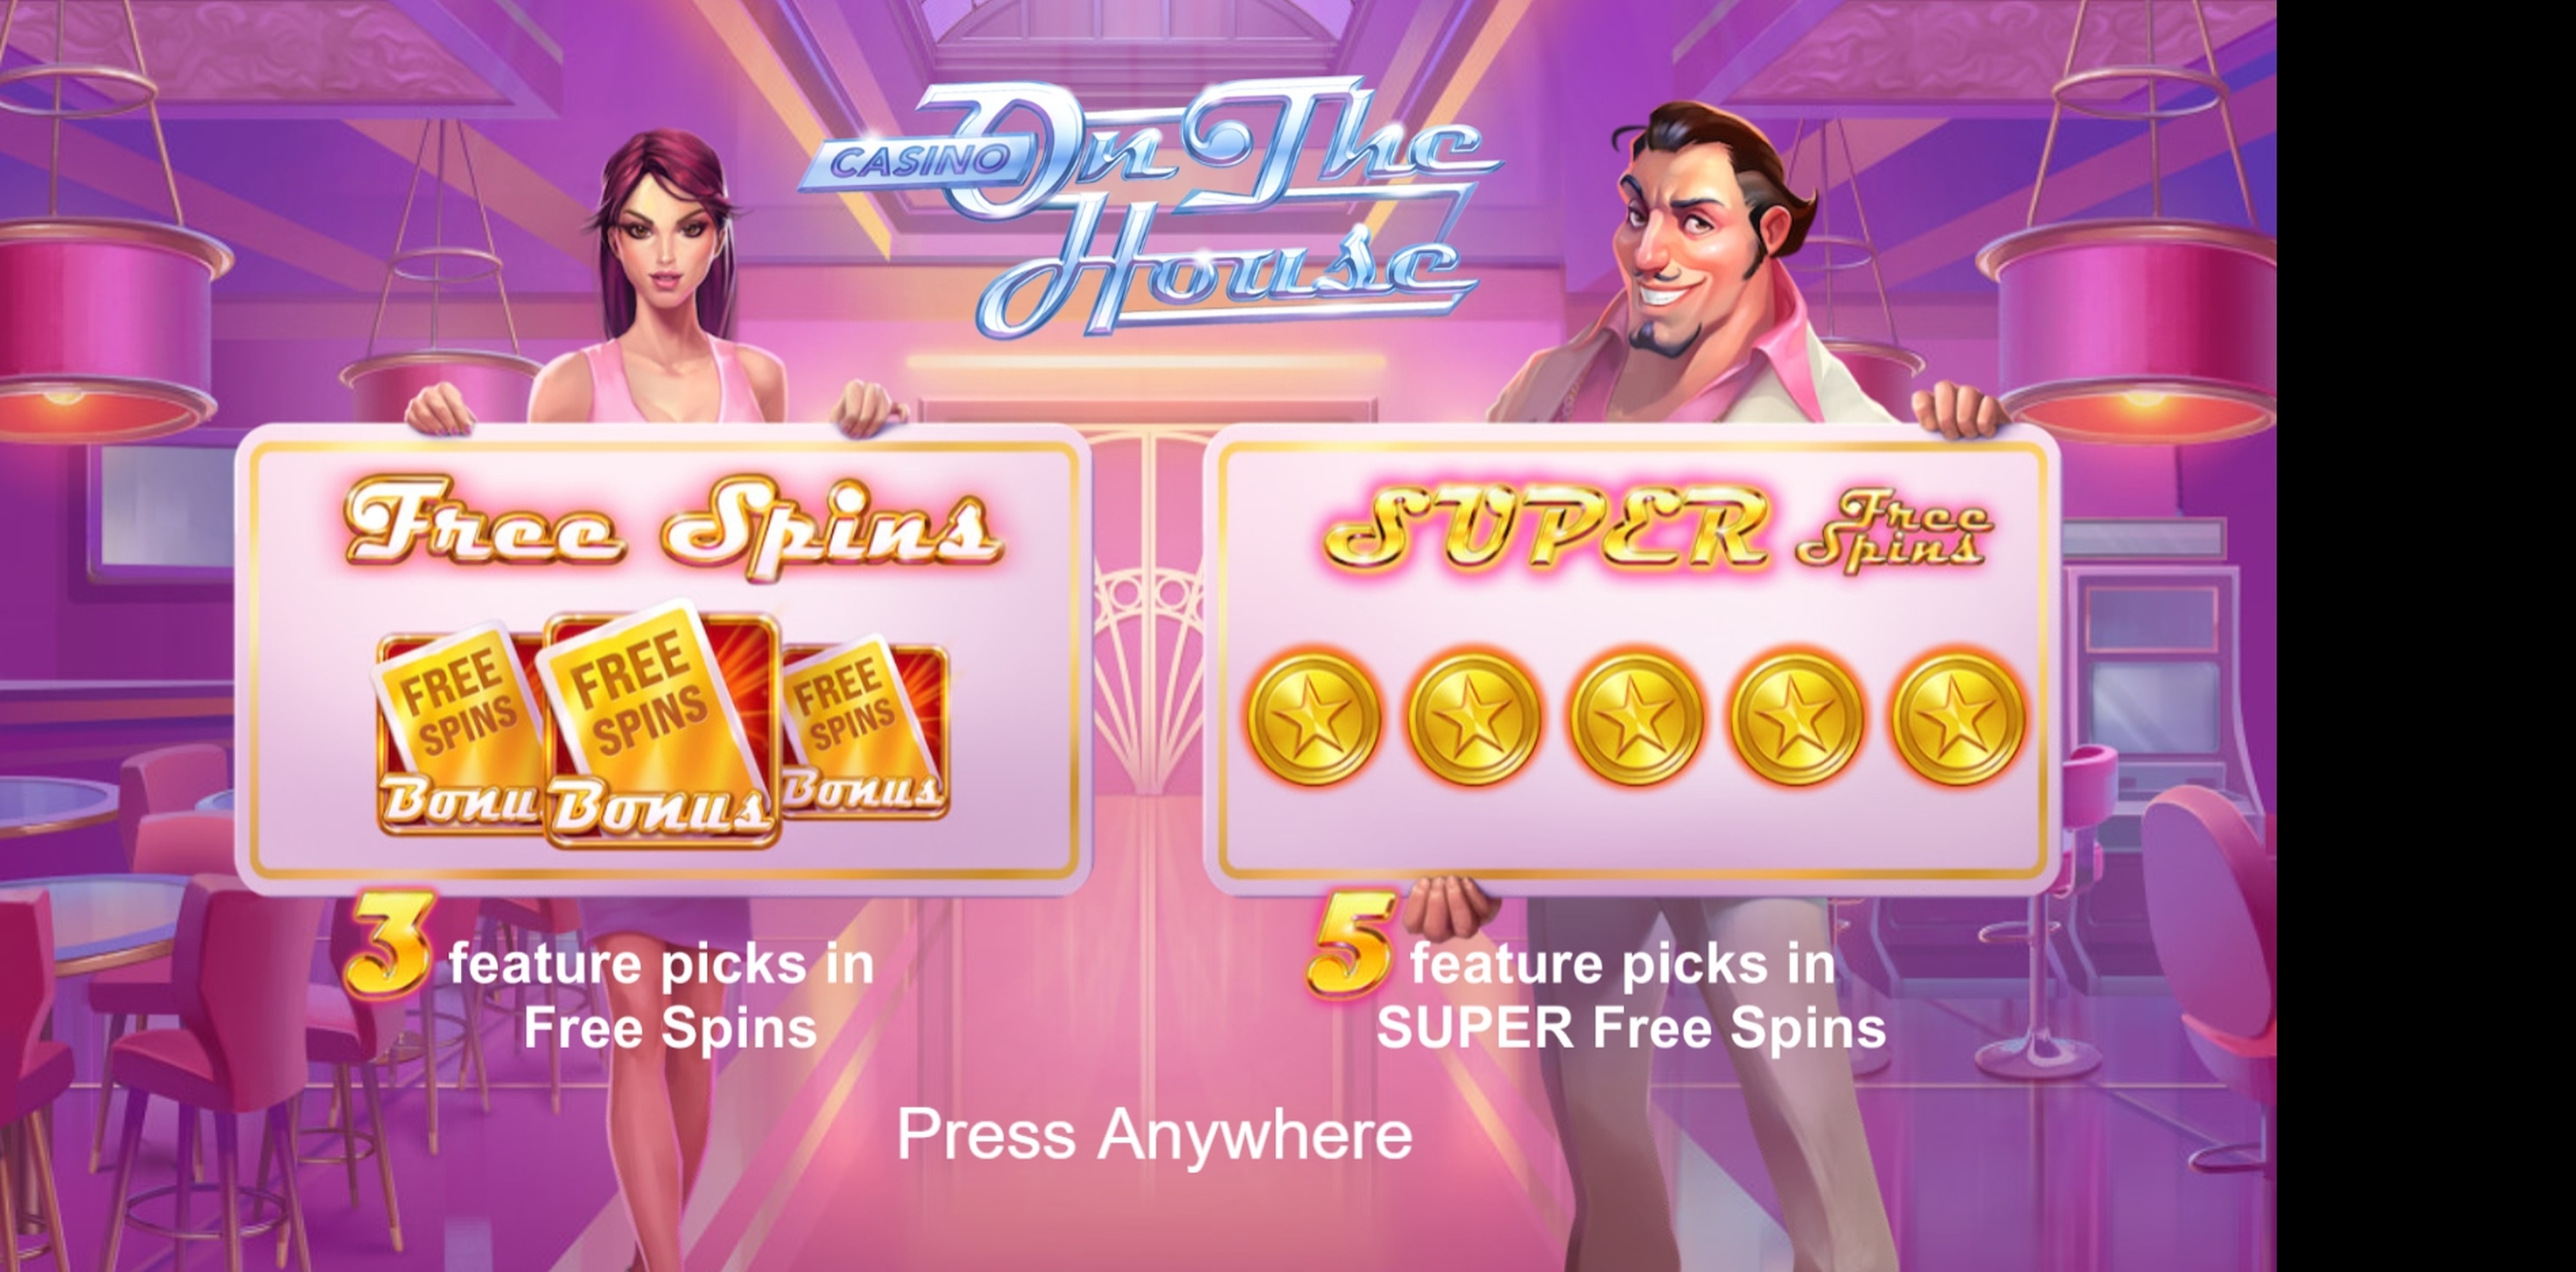 Play Casino On the House Free Casino Slot Game by STHLM Gaming